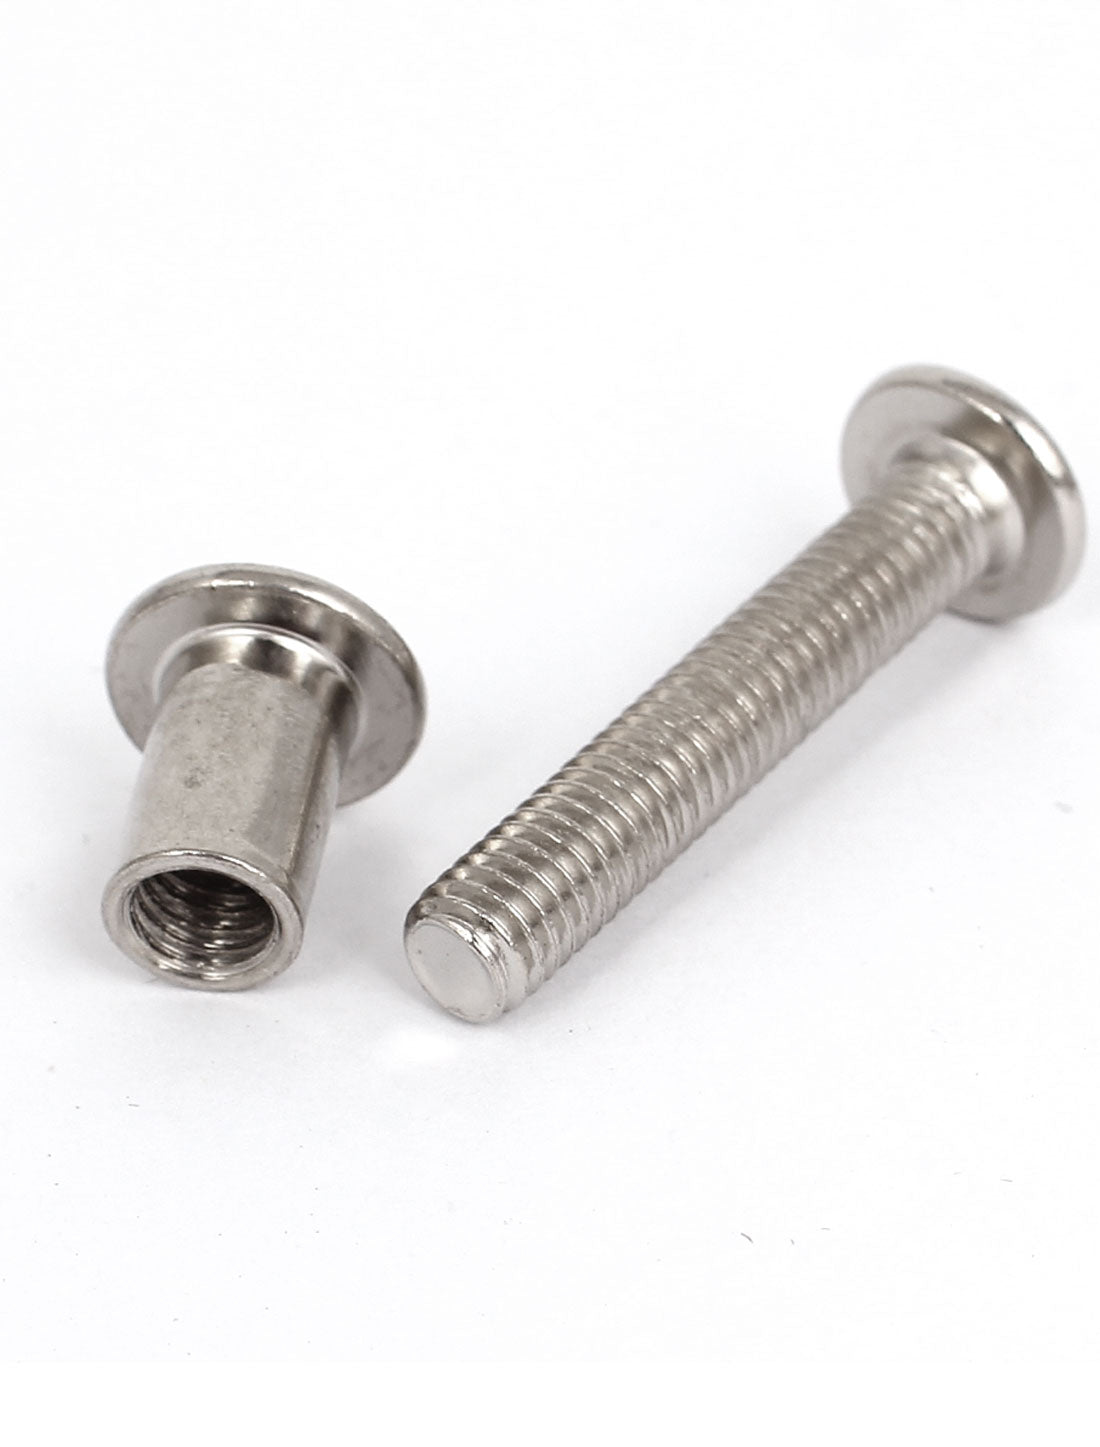 uxcell Uxcell Furniture 6mmx35mm Phillips Countersunk Head Screw Bolts Dowel Barrel Nuts 10sets